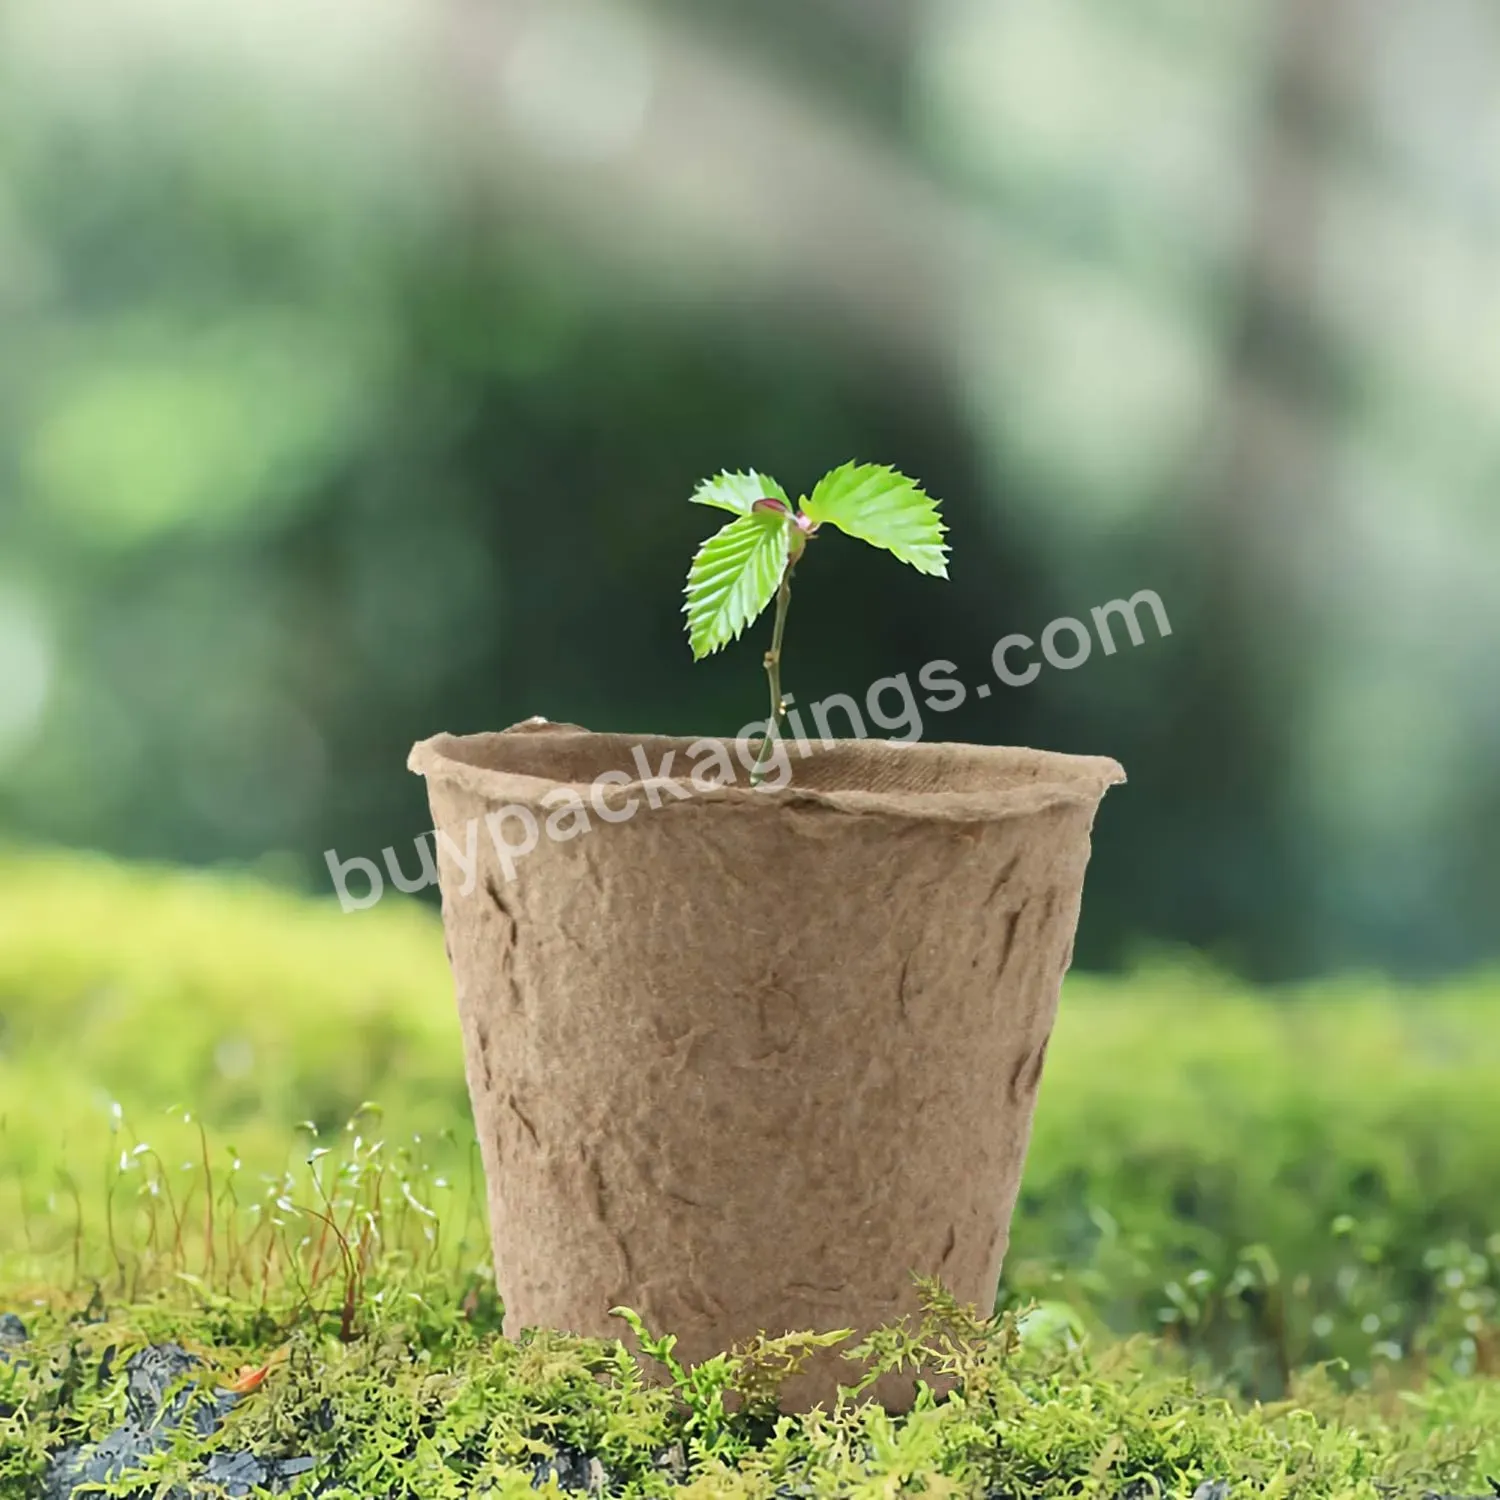 75 Pack 2.4" Peat Nursery Pots For Seedling Pots Organic Biodegradable Paper Pots Herb Seed Starters Kit With 75 Plant Ga - Buy Nursery Pots,Paper Seedling Pot,Molded Pulp Peat Pot.